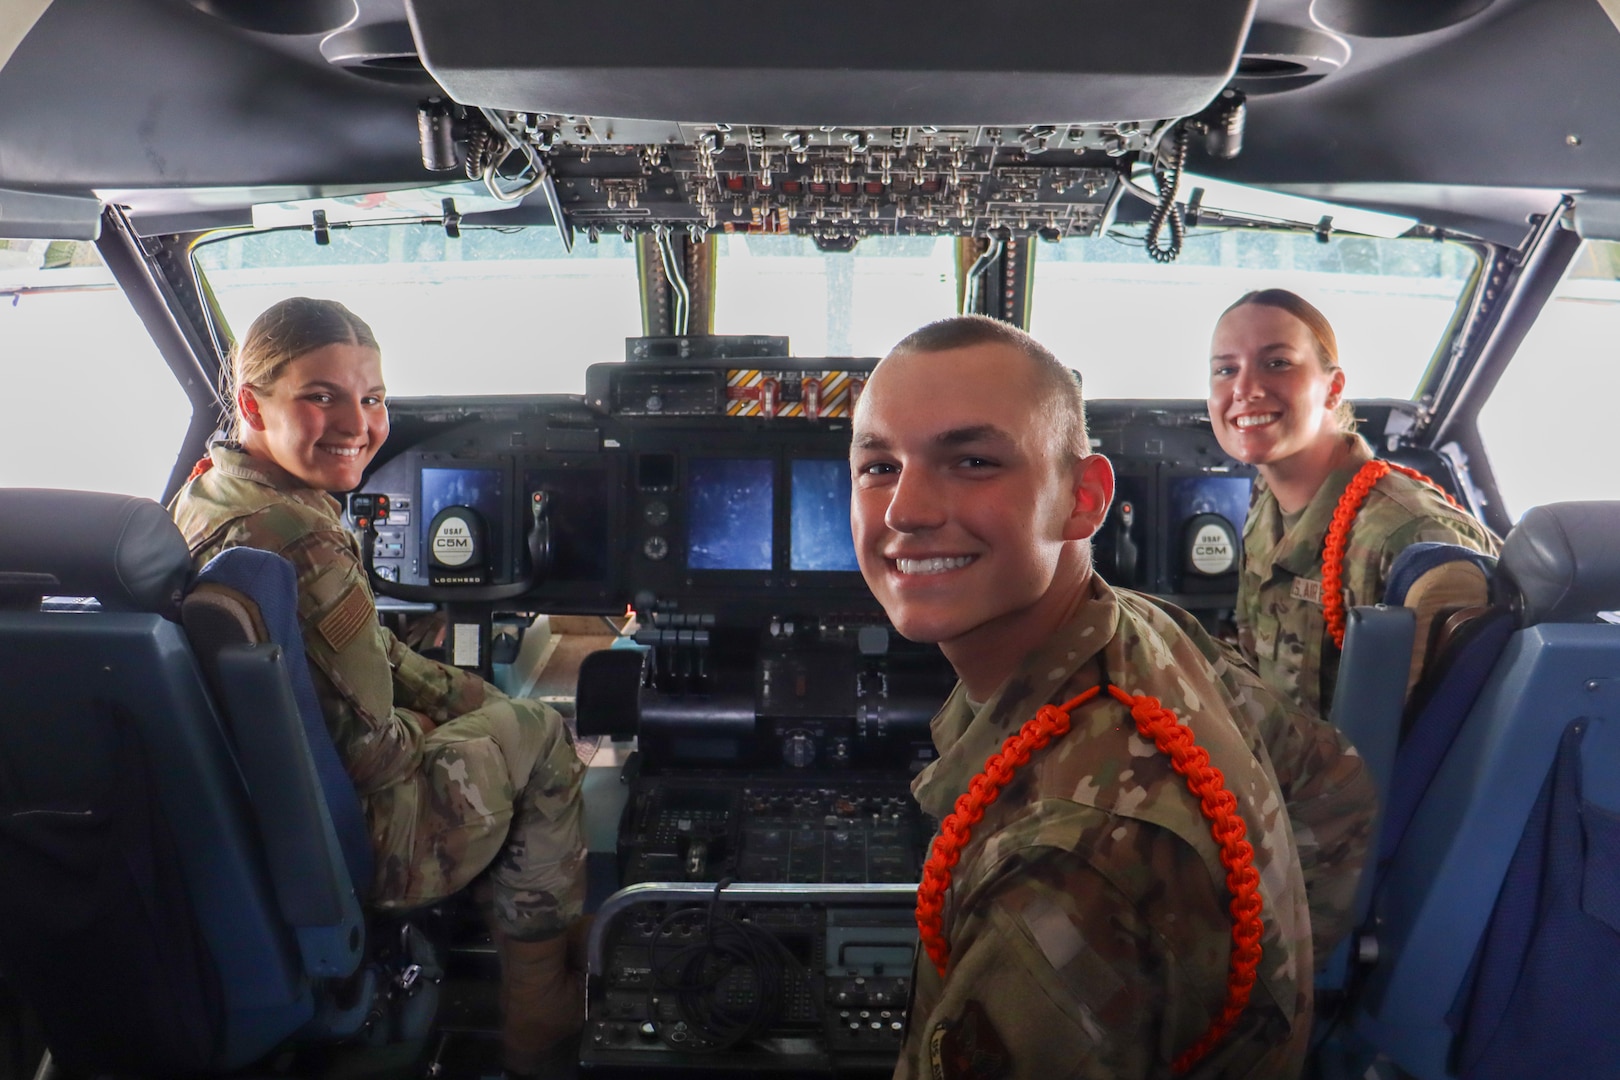 Airman Sam Murfin, left, recent Basic Military Training graduate, Airman Dane Larson, center, recent BMT graduate, and Airman 1st Class DonnaMae Smith, right, recent BMT graduate pose for photo inside the cockpit of a 433rd Airlift Wing’s C-5M Super Galaxy at The Great Texas Airshow at Joint Base San Antonio-Randolph, Texas Apr. 7, 2024.